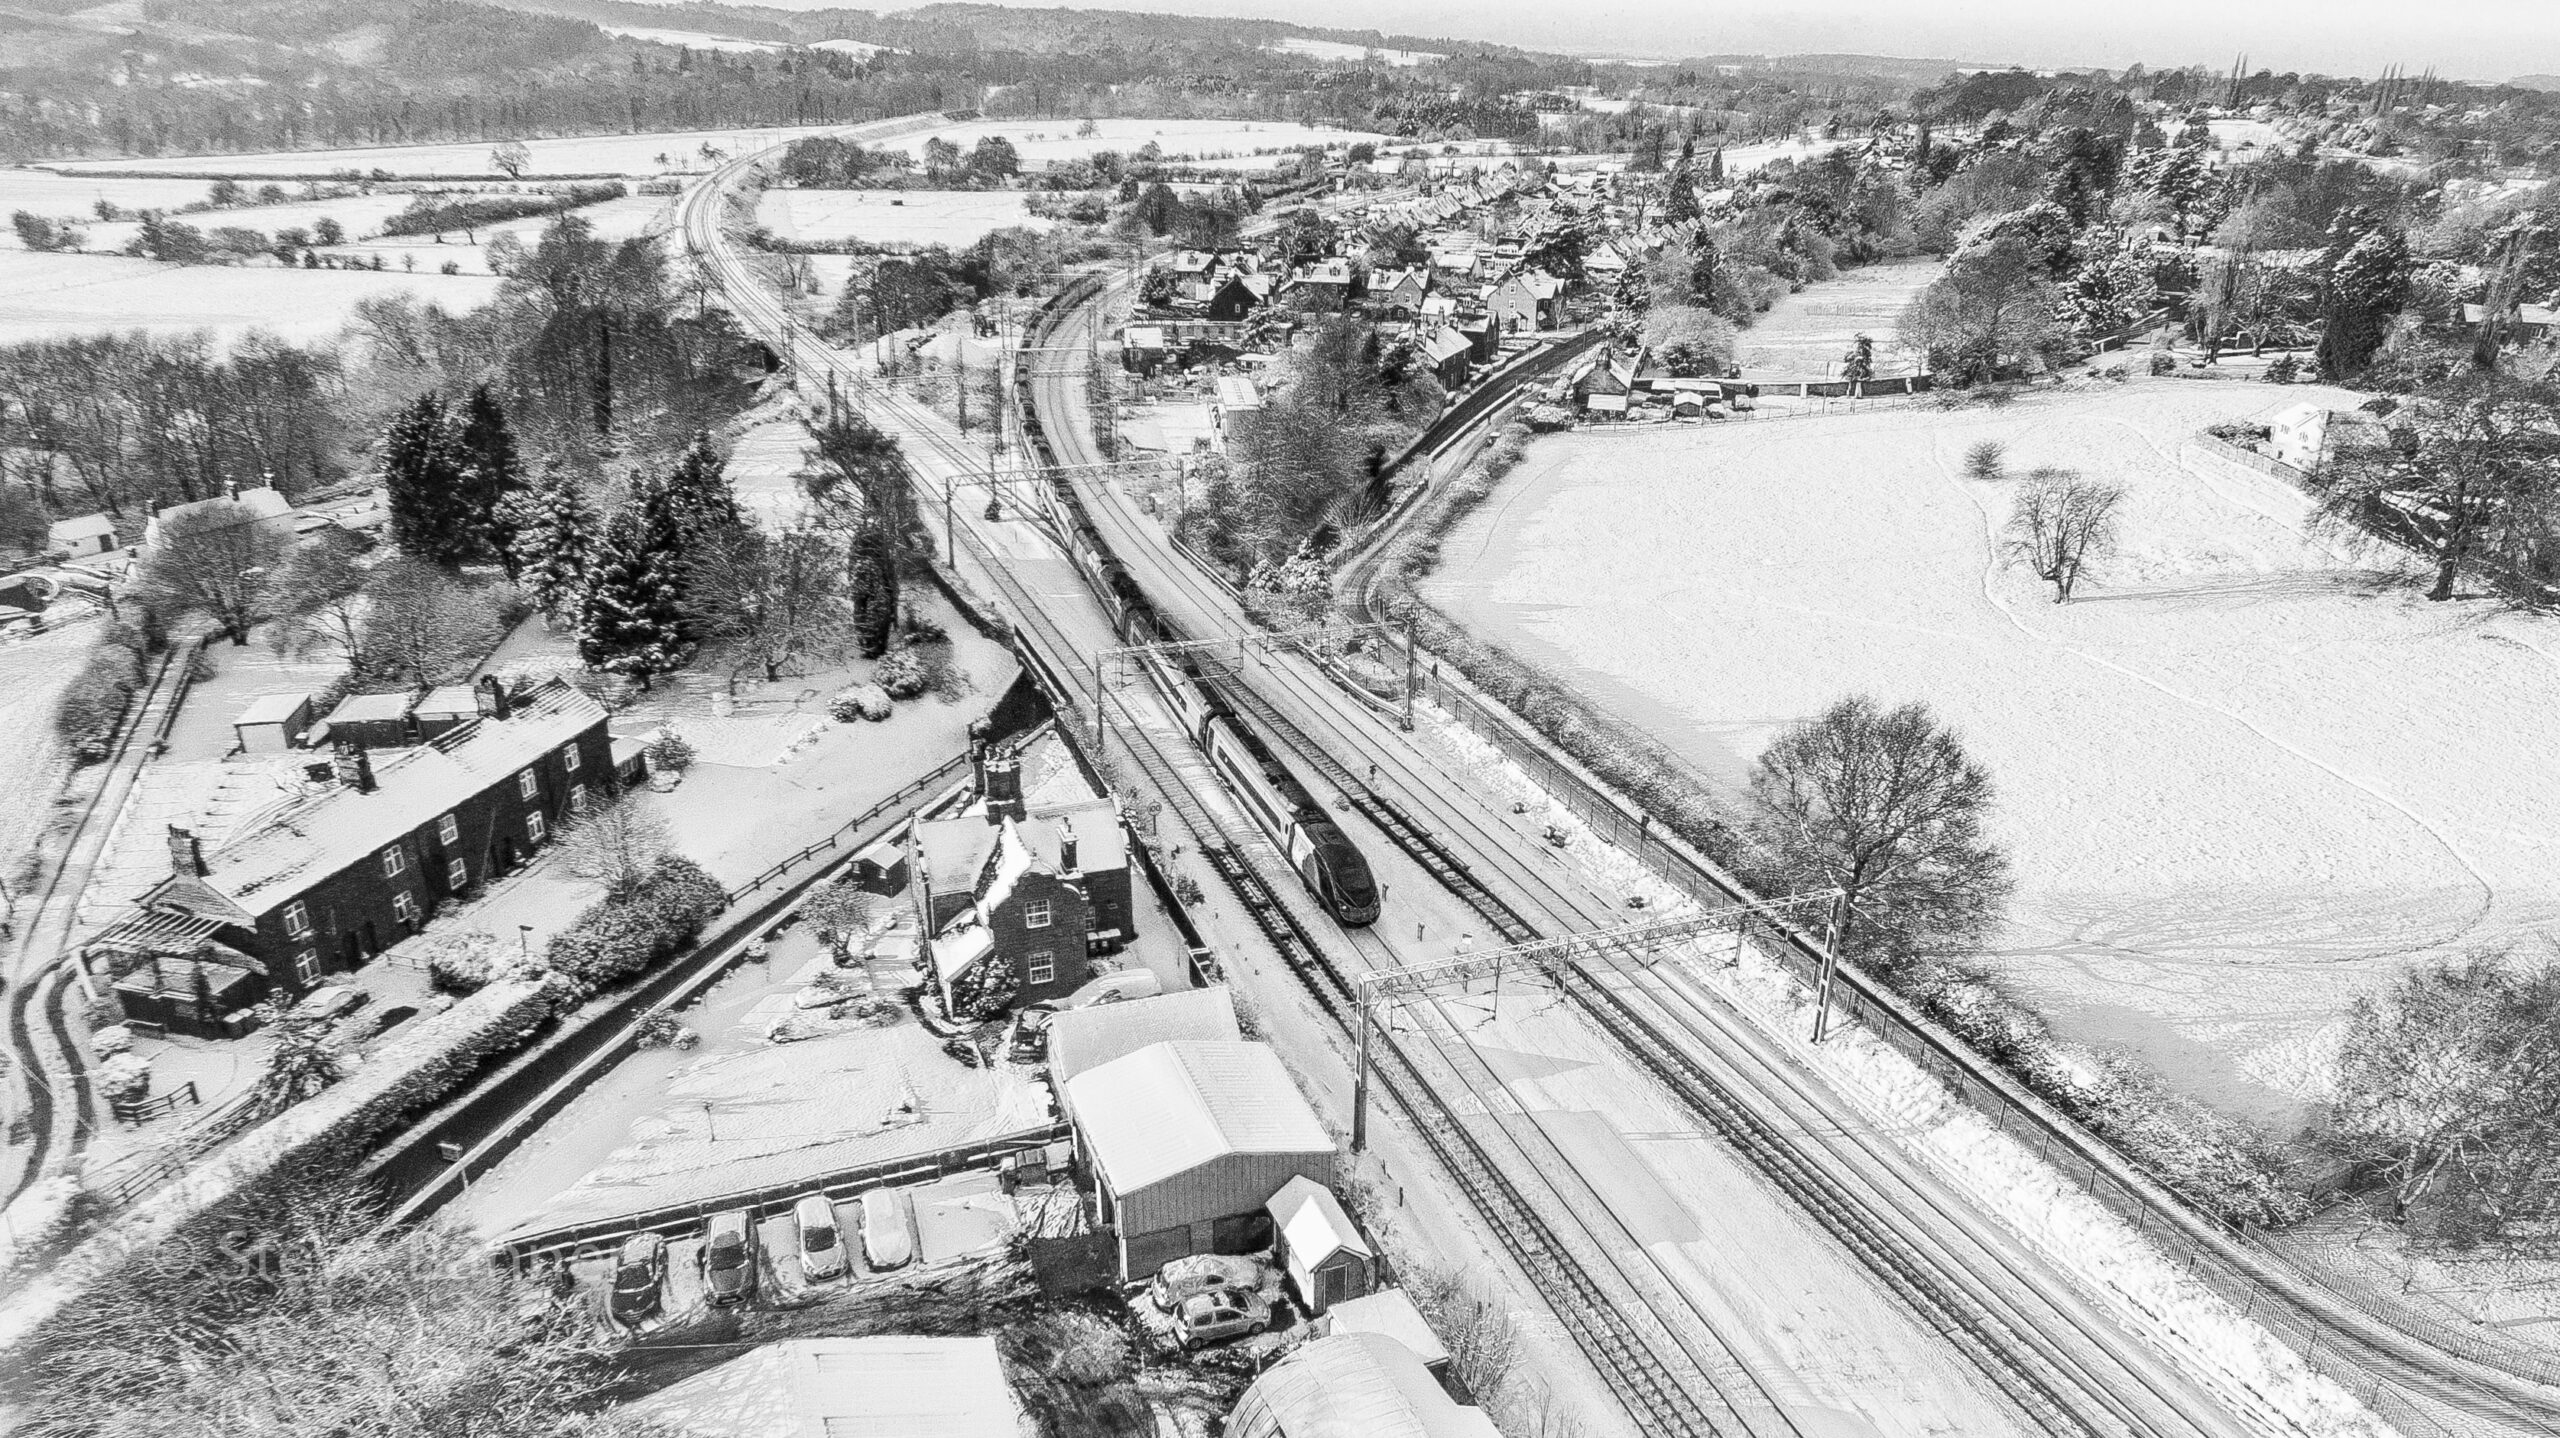 photo of a train in the snow taken by drone